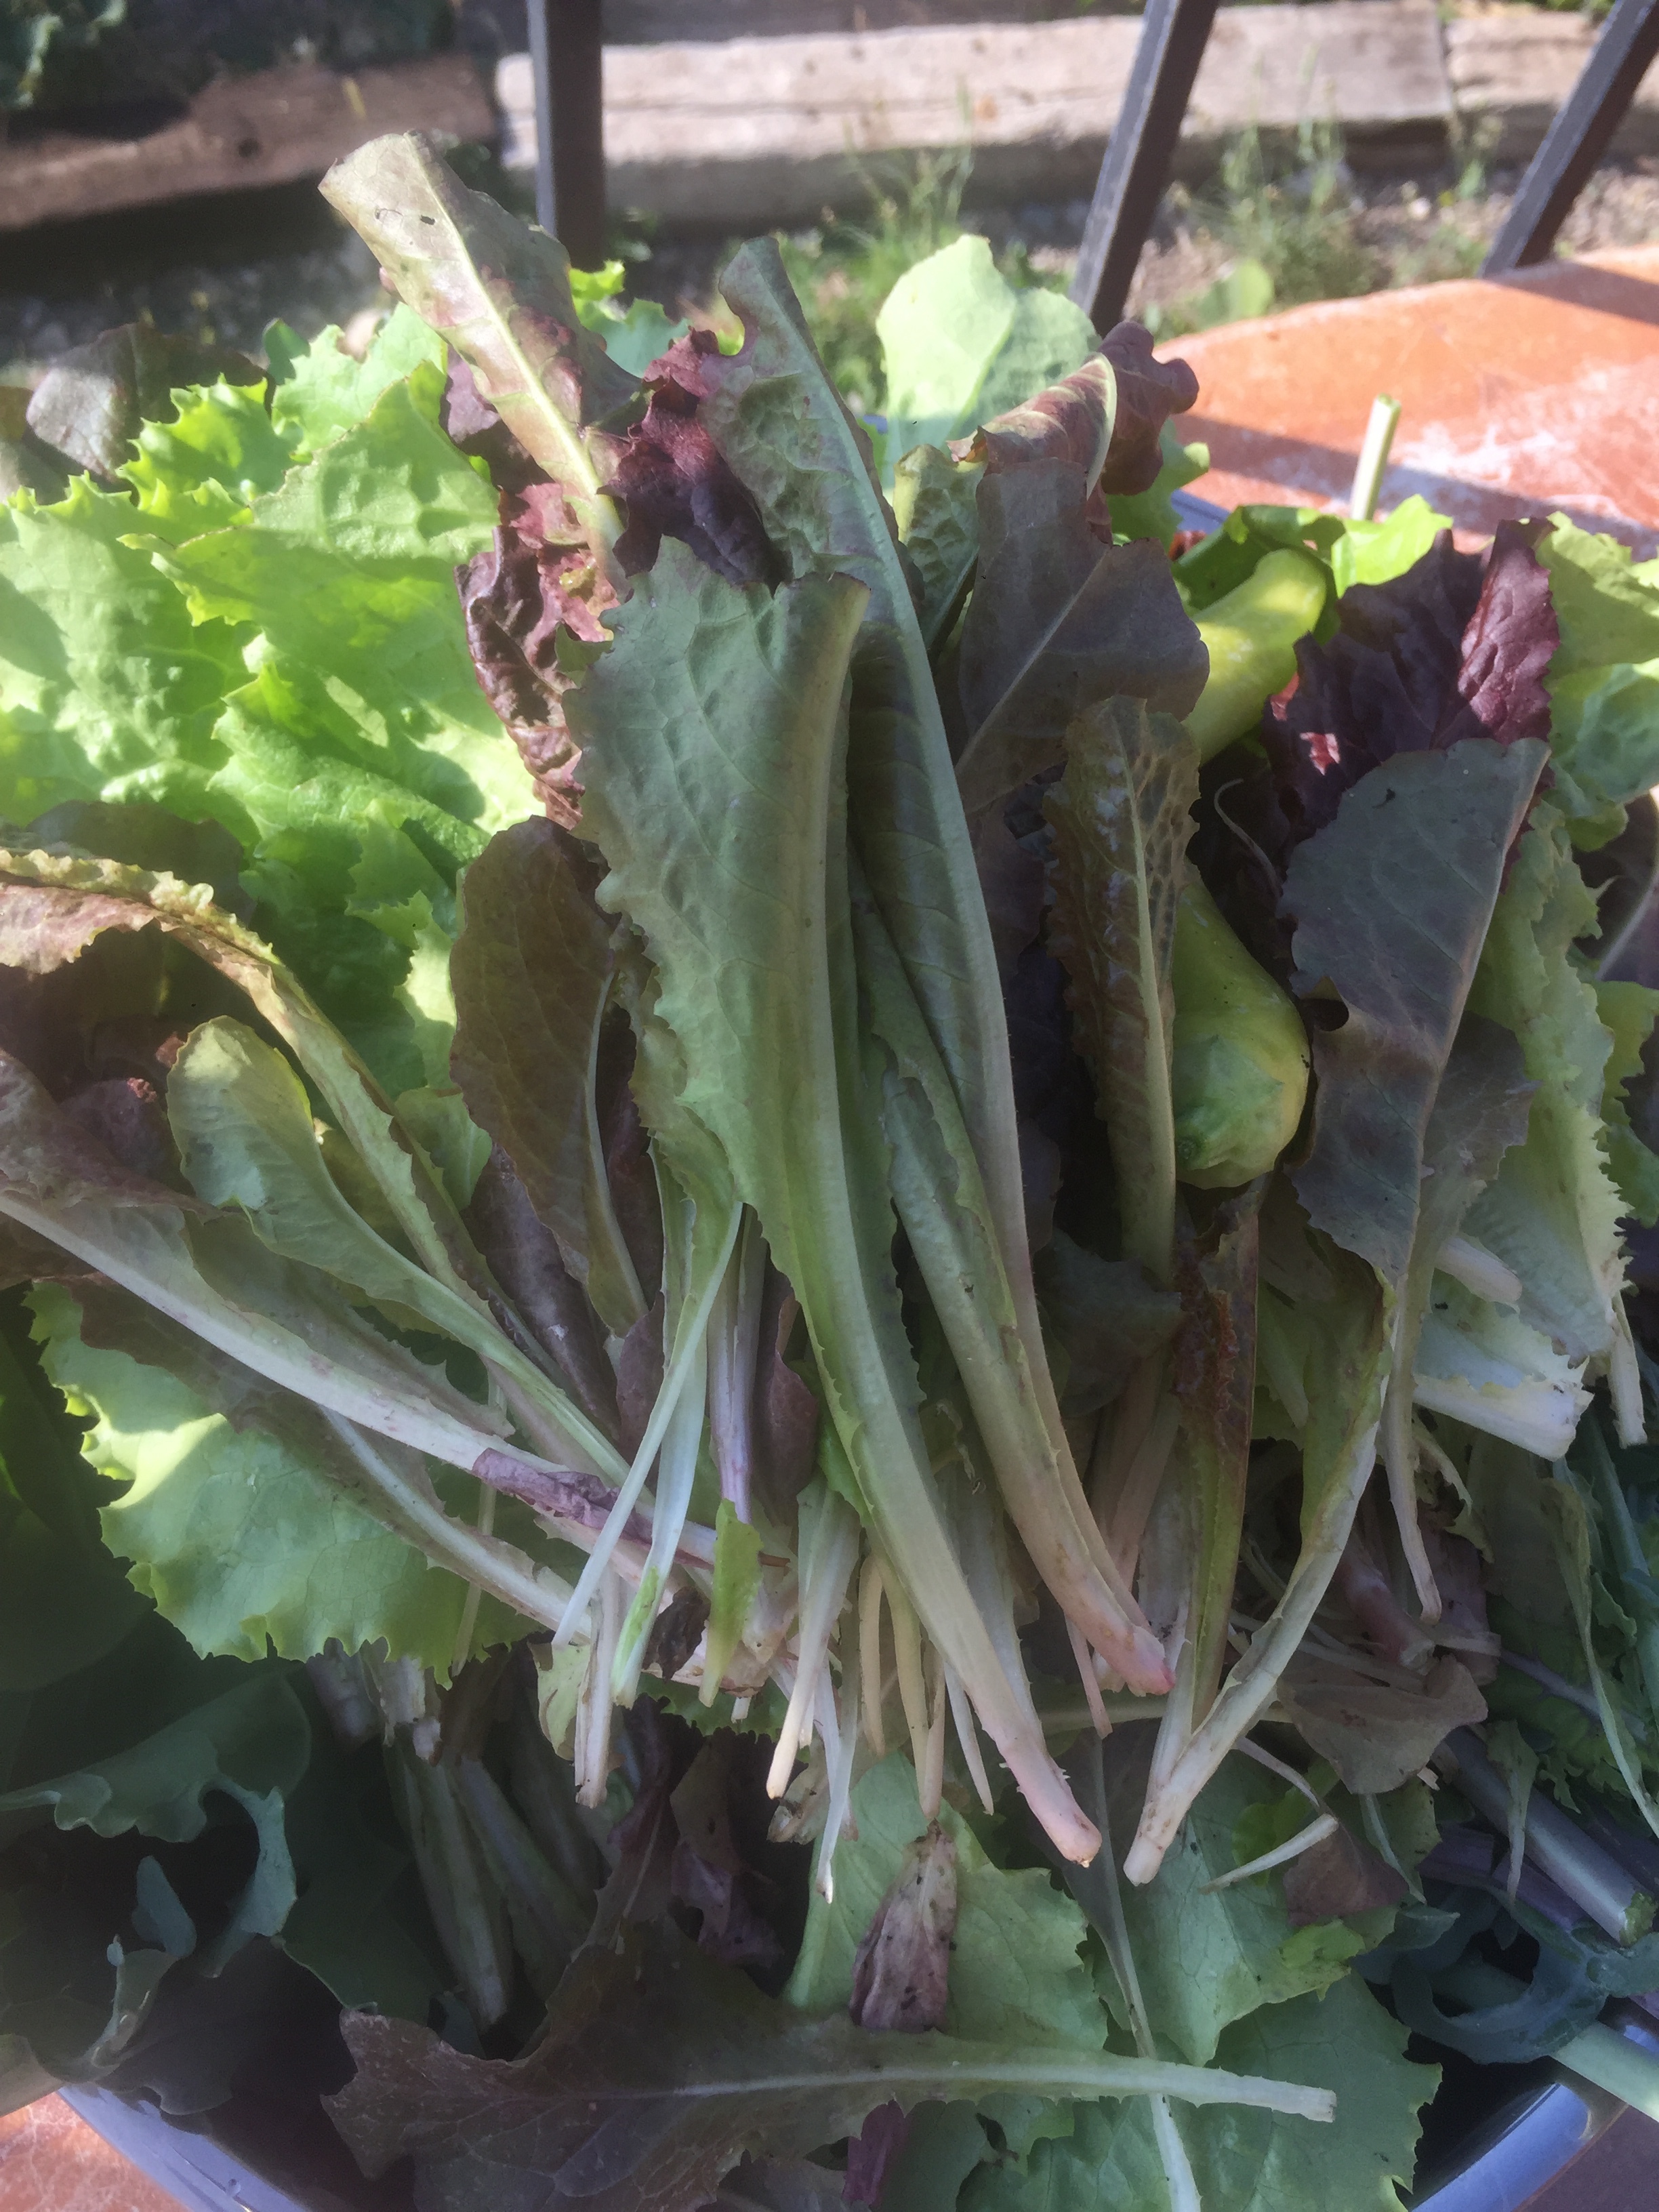 How To Keep Fresh Picked Salad Greens Crisp And Beautiful No More